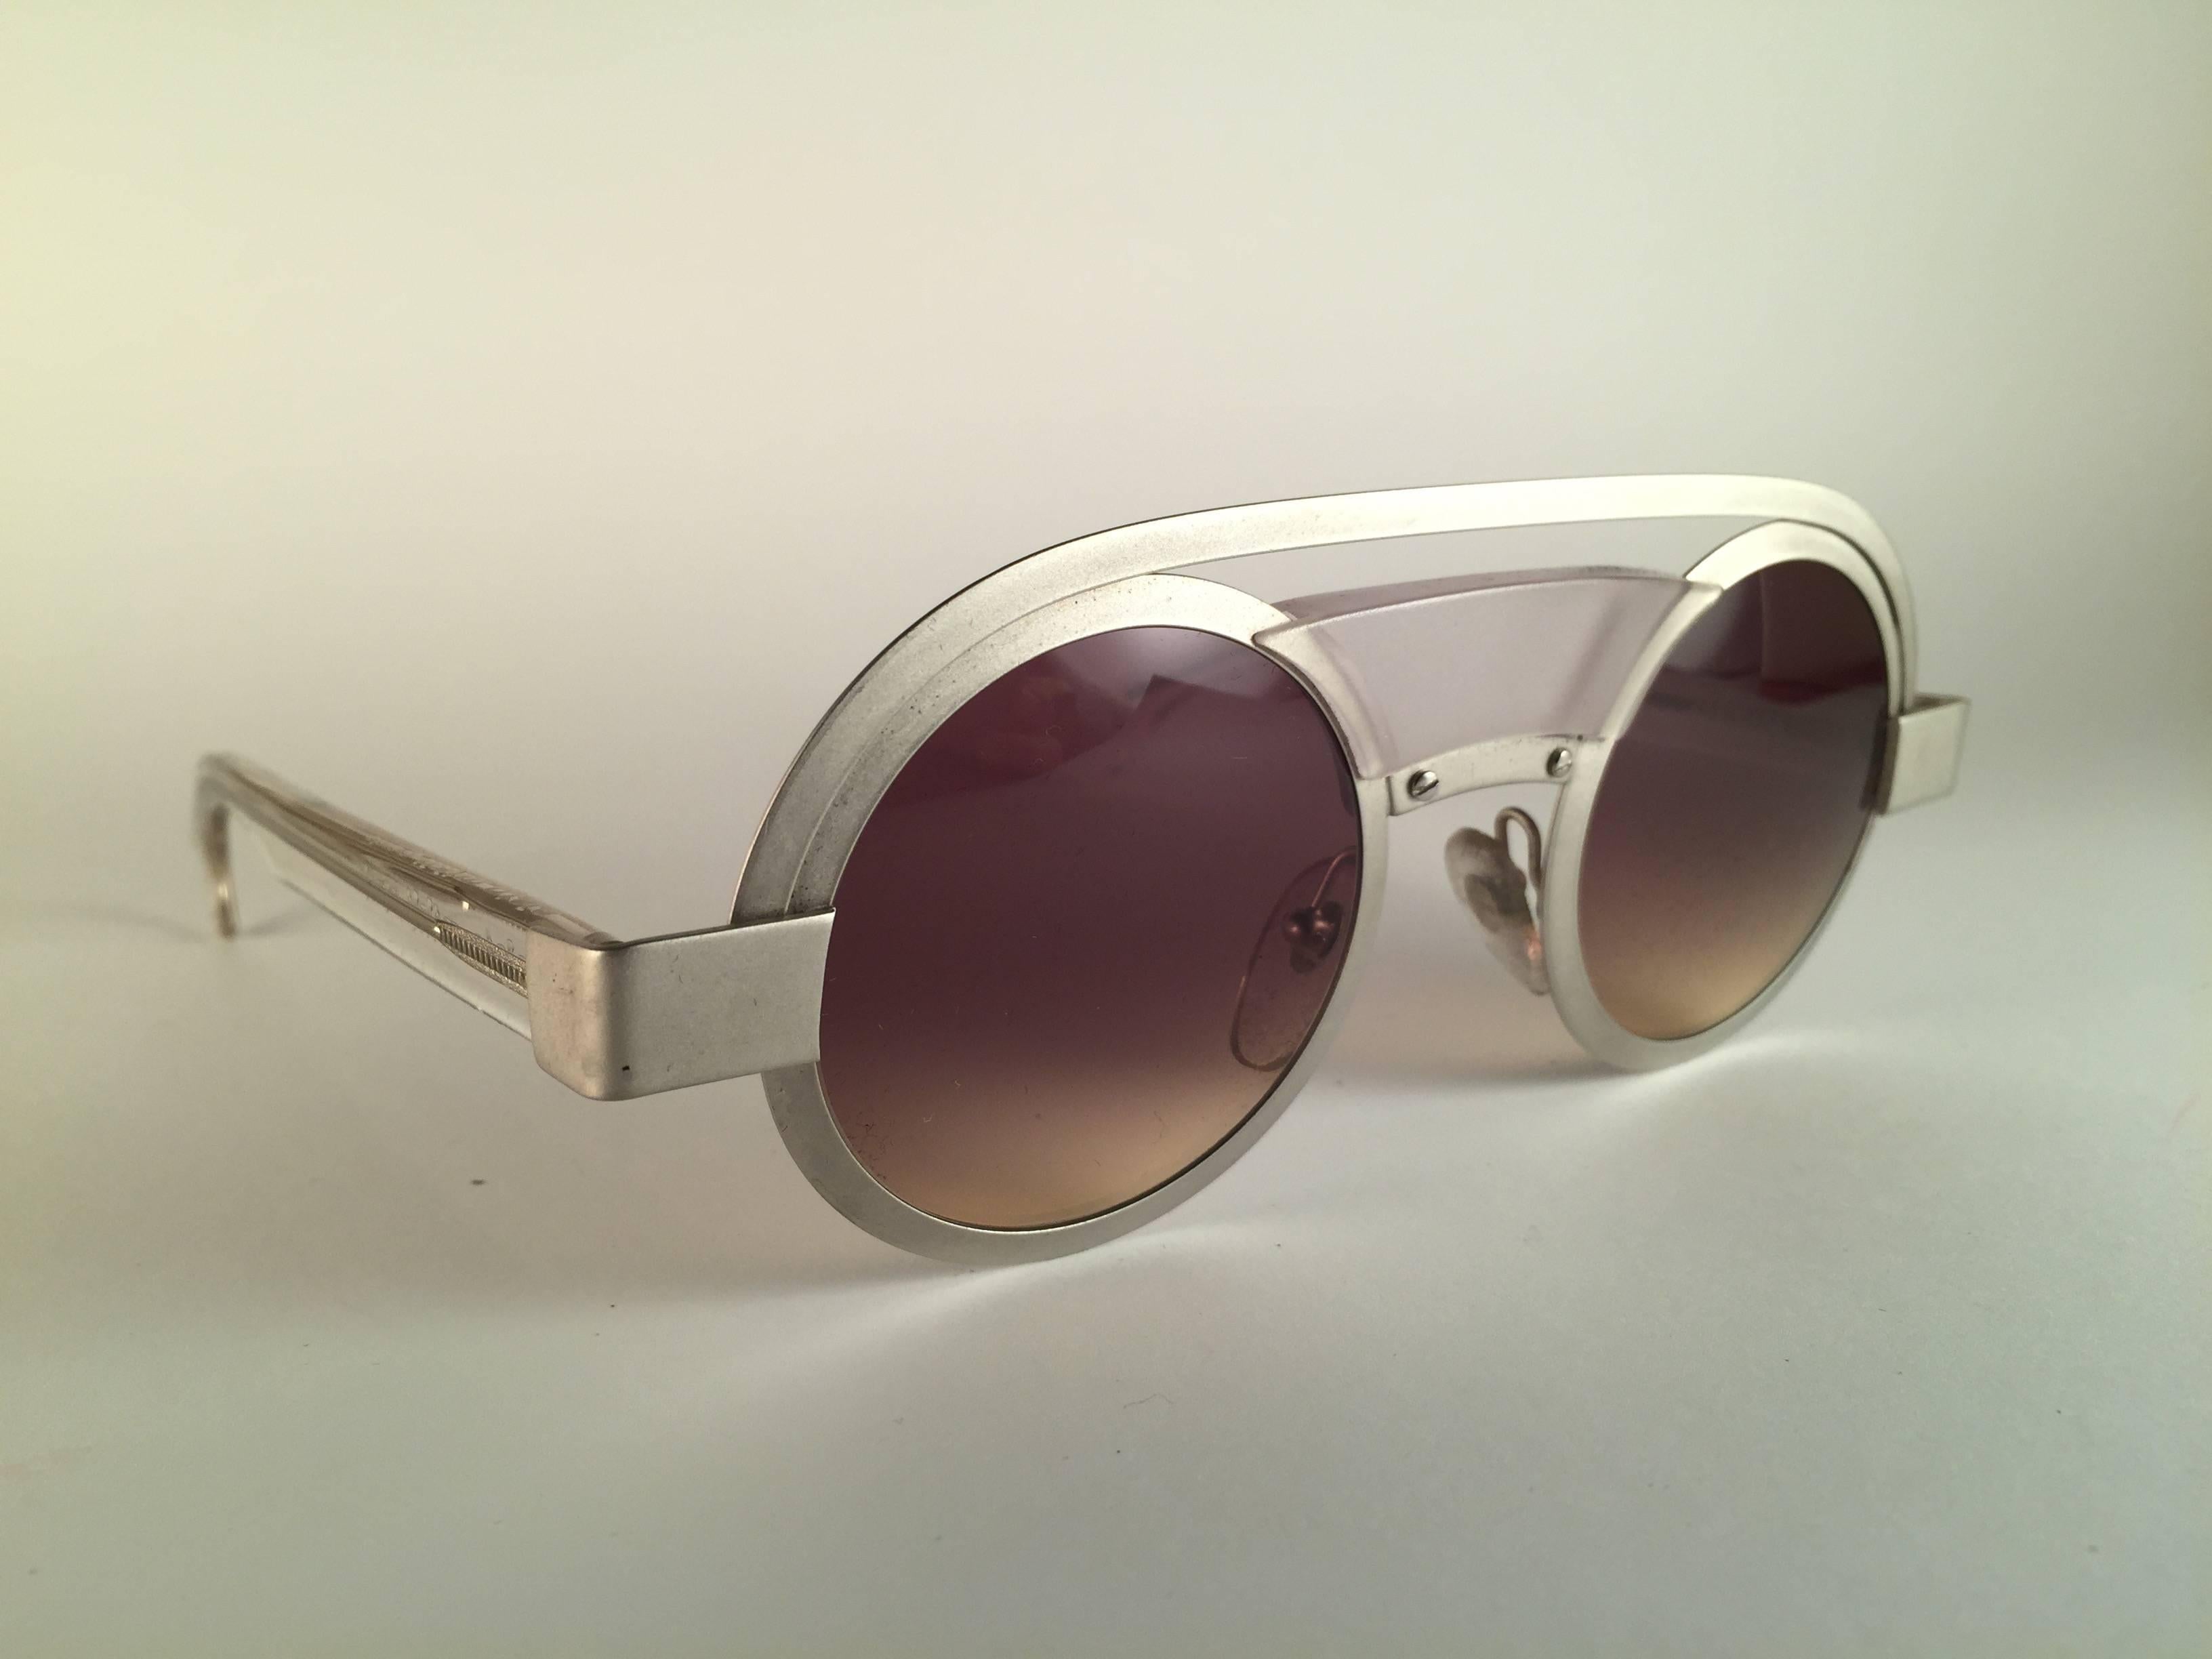 New Vintage Rare Alain Mikli Round Aluminium frame.

Rare item in new and unworn condition. Spotless light brown gradient lenses.

Please consider that this item is nearly 40 years old so it could show minor sign of wear due to storage.

Comes with